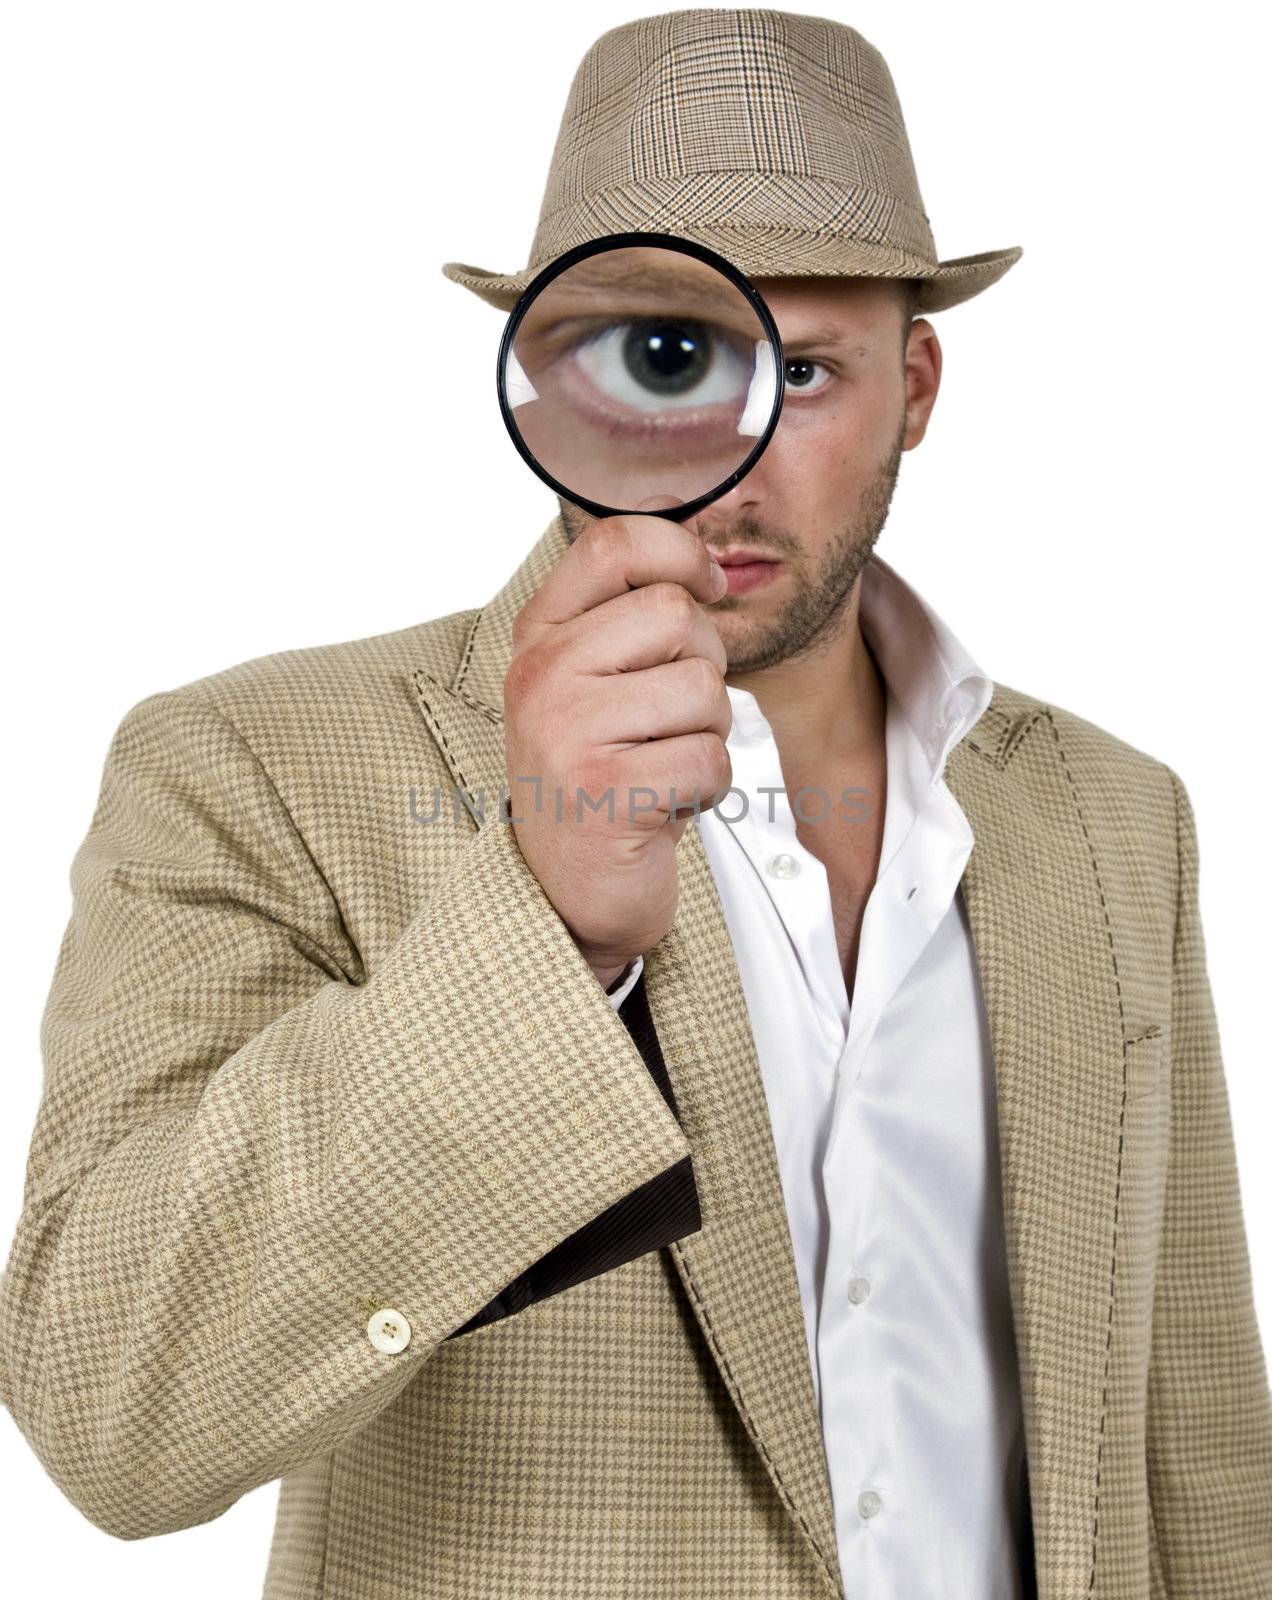 detective holding magnifier on isolated background
